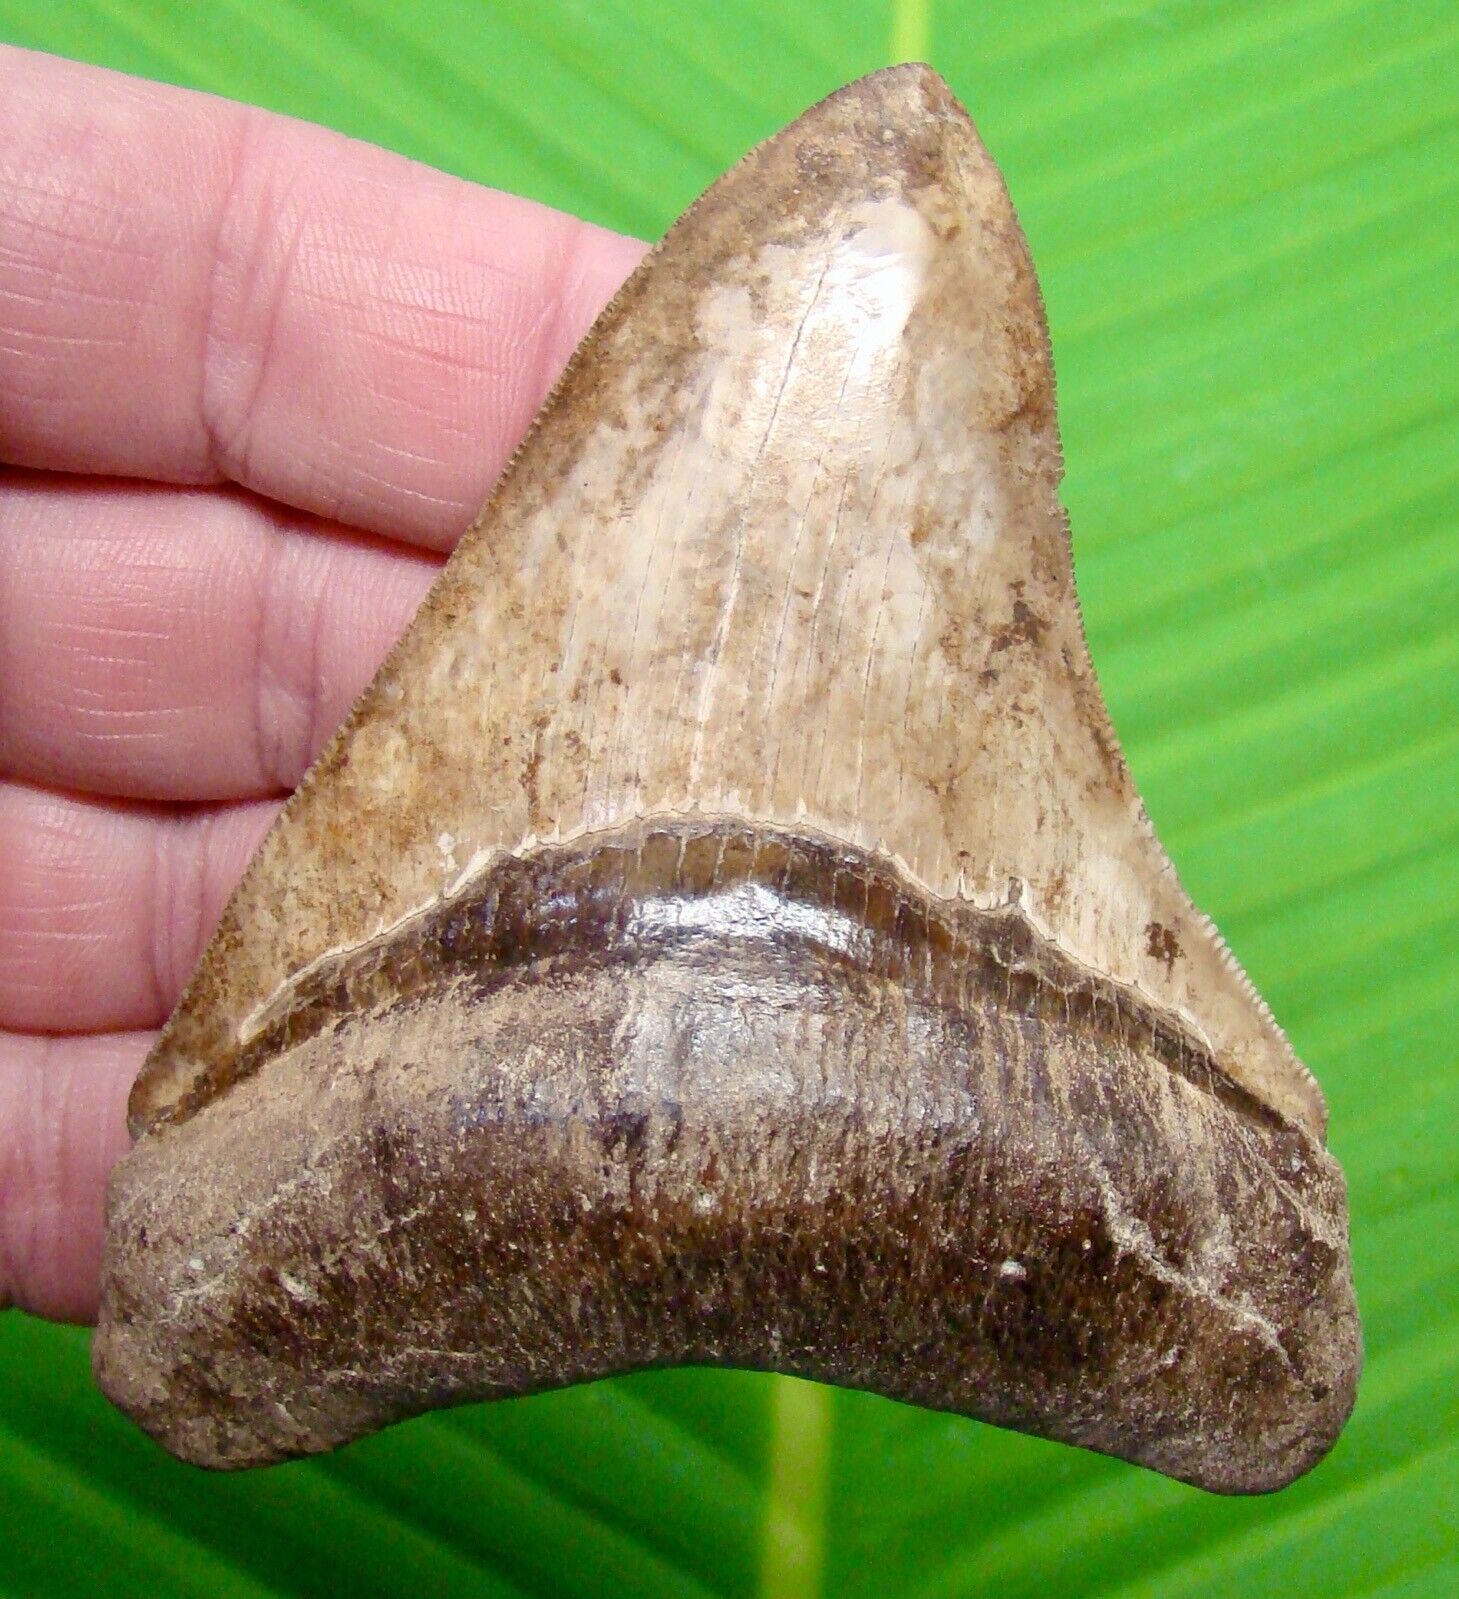 MEGALODON SHARK TOOTH  - 3 & 7/8 in. ST. MARY’S RIVER - GEORGIA - MEGLADONE